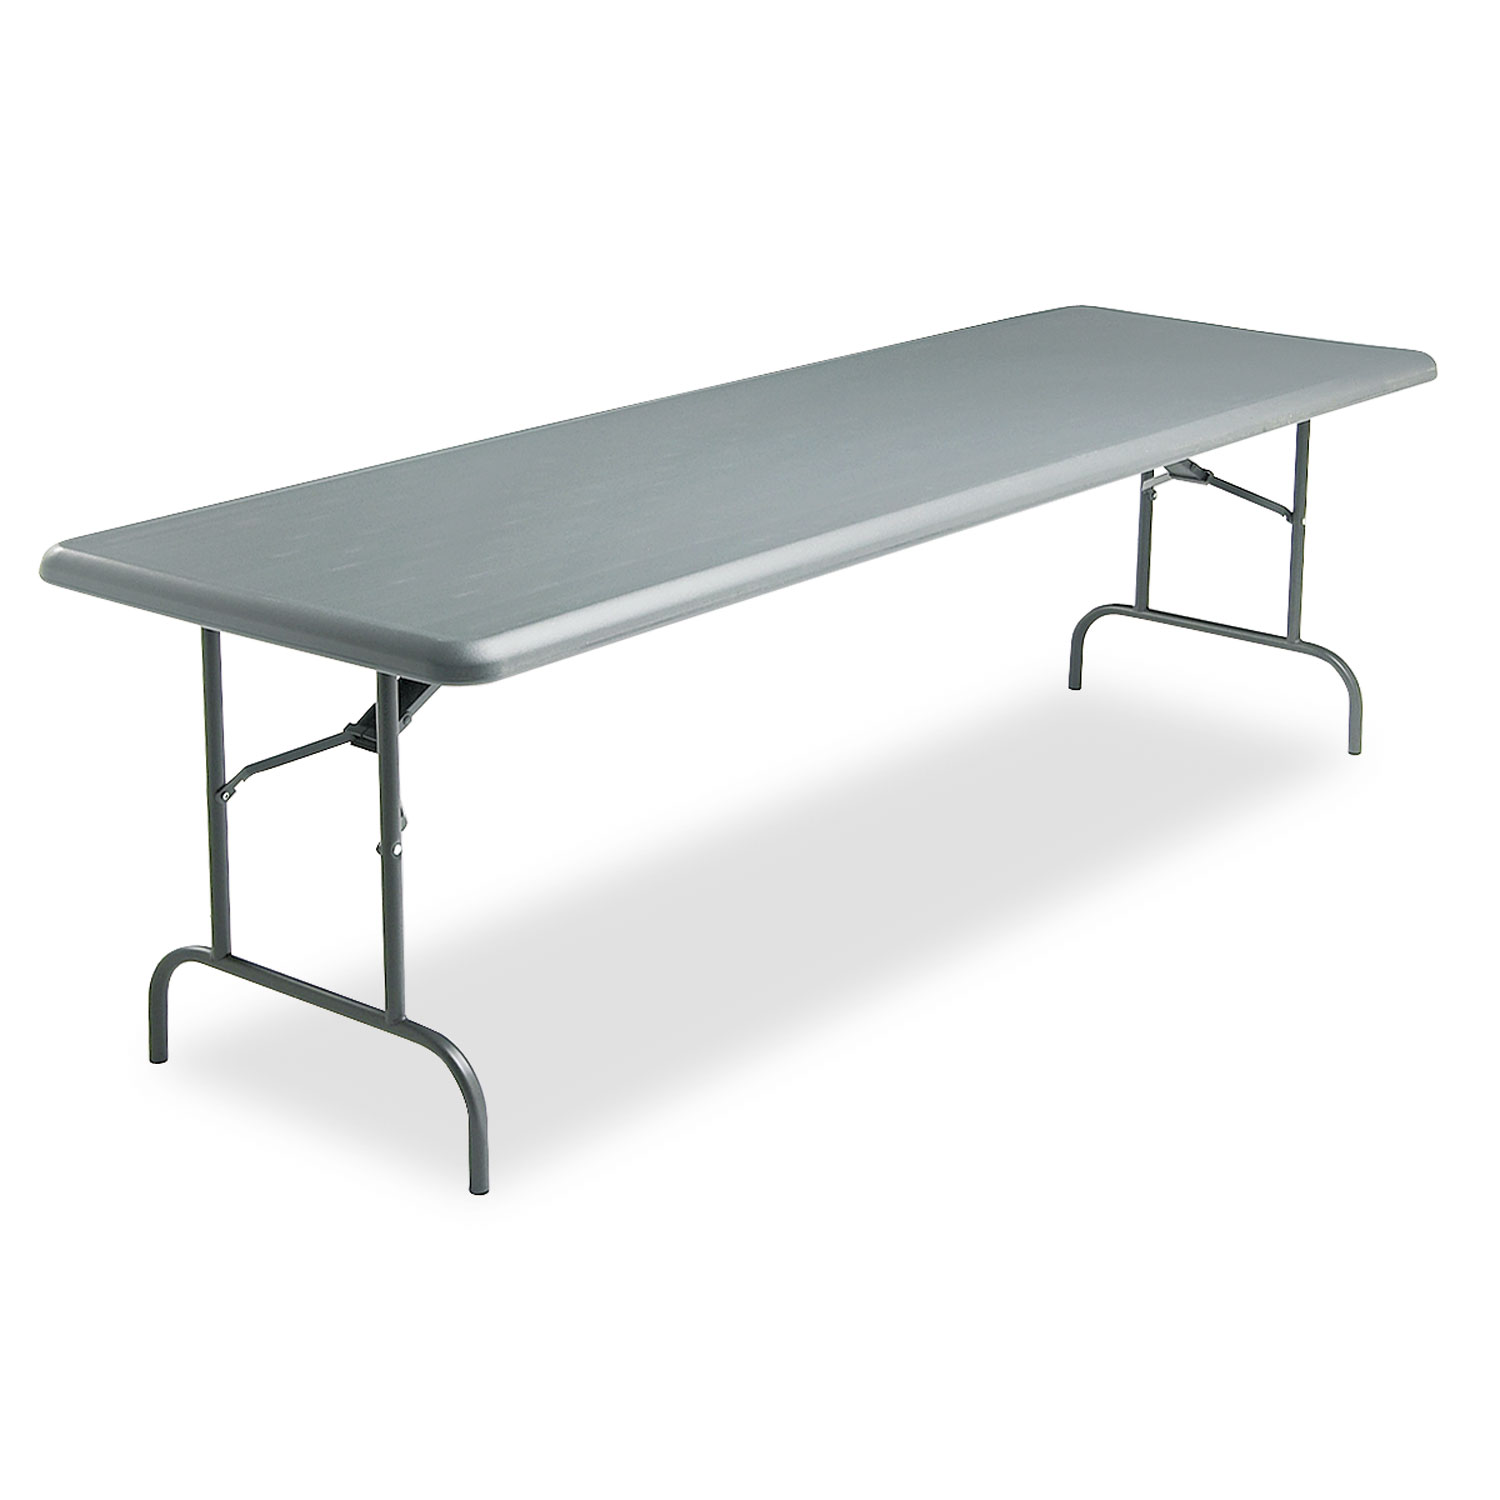  Iceberg 65237 IndestrucTables Too 1200 Series Folding Table, 96w x 30d x 29h, Charcoal (ICE65237) 